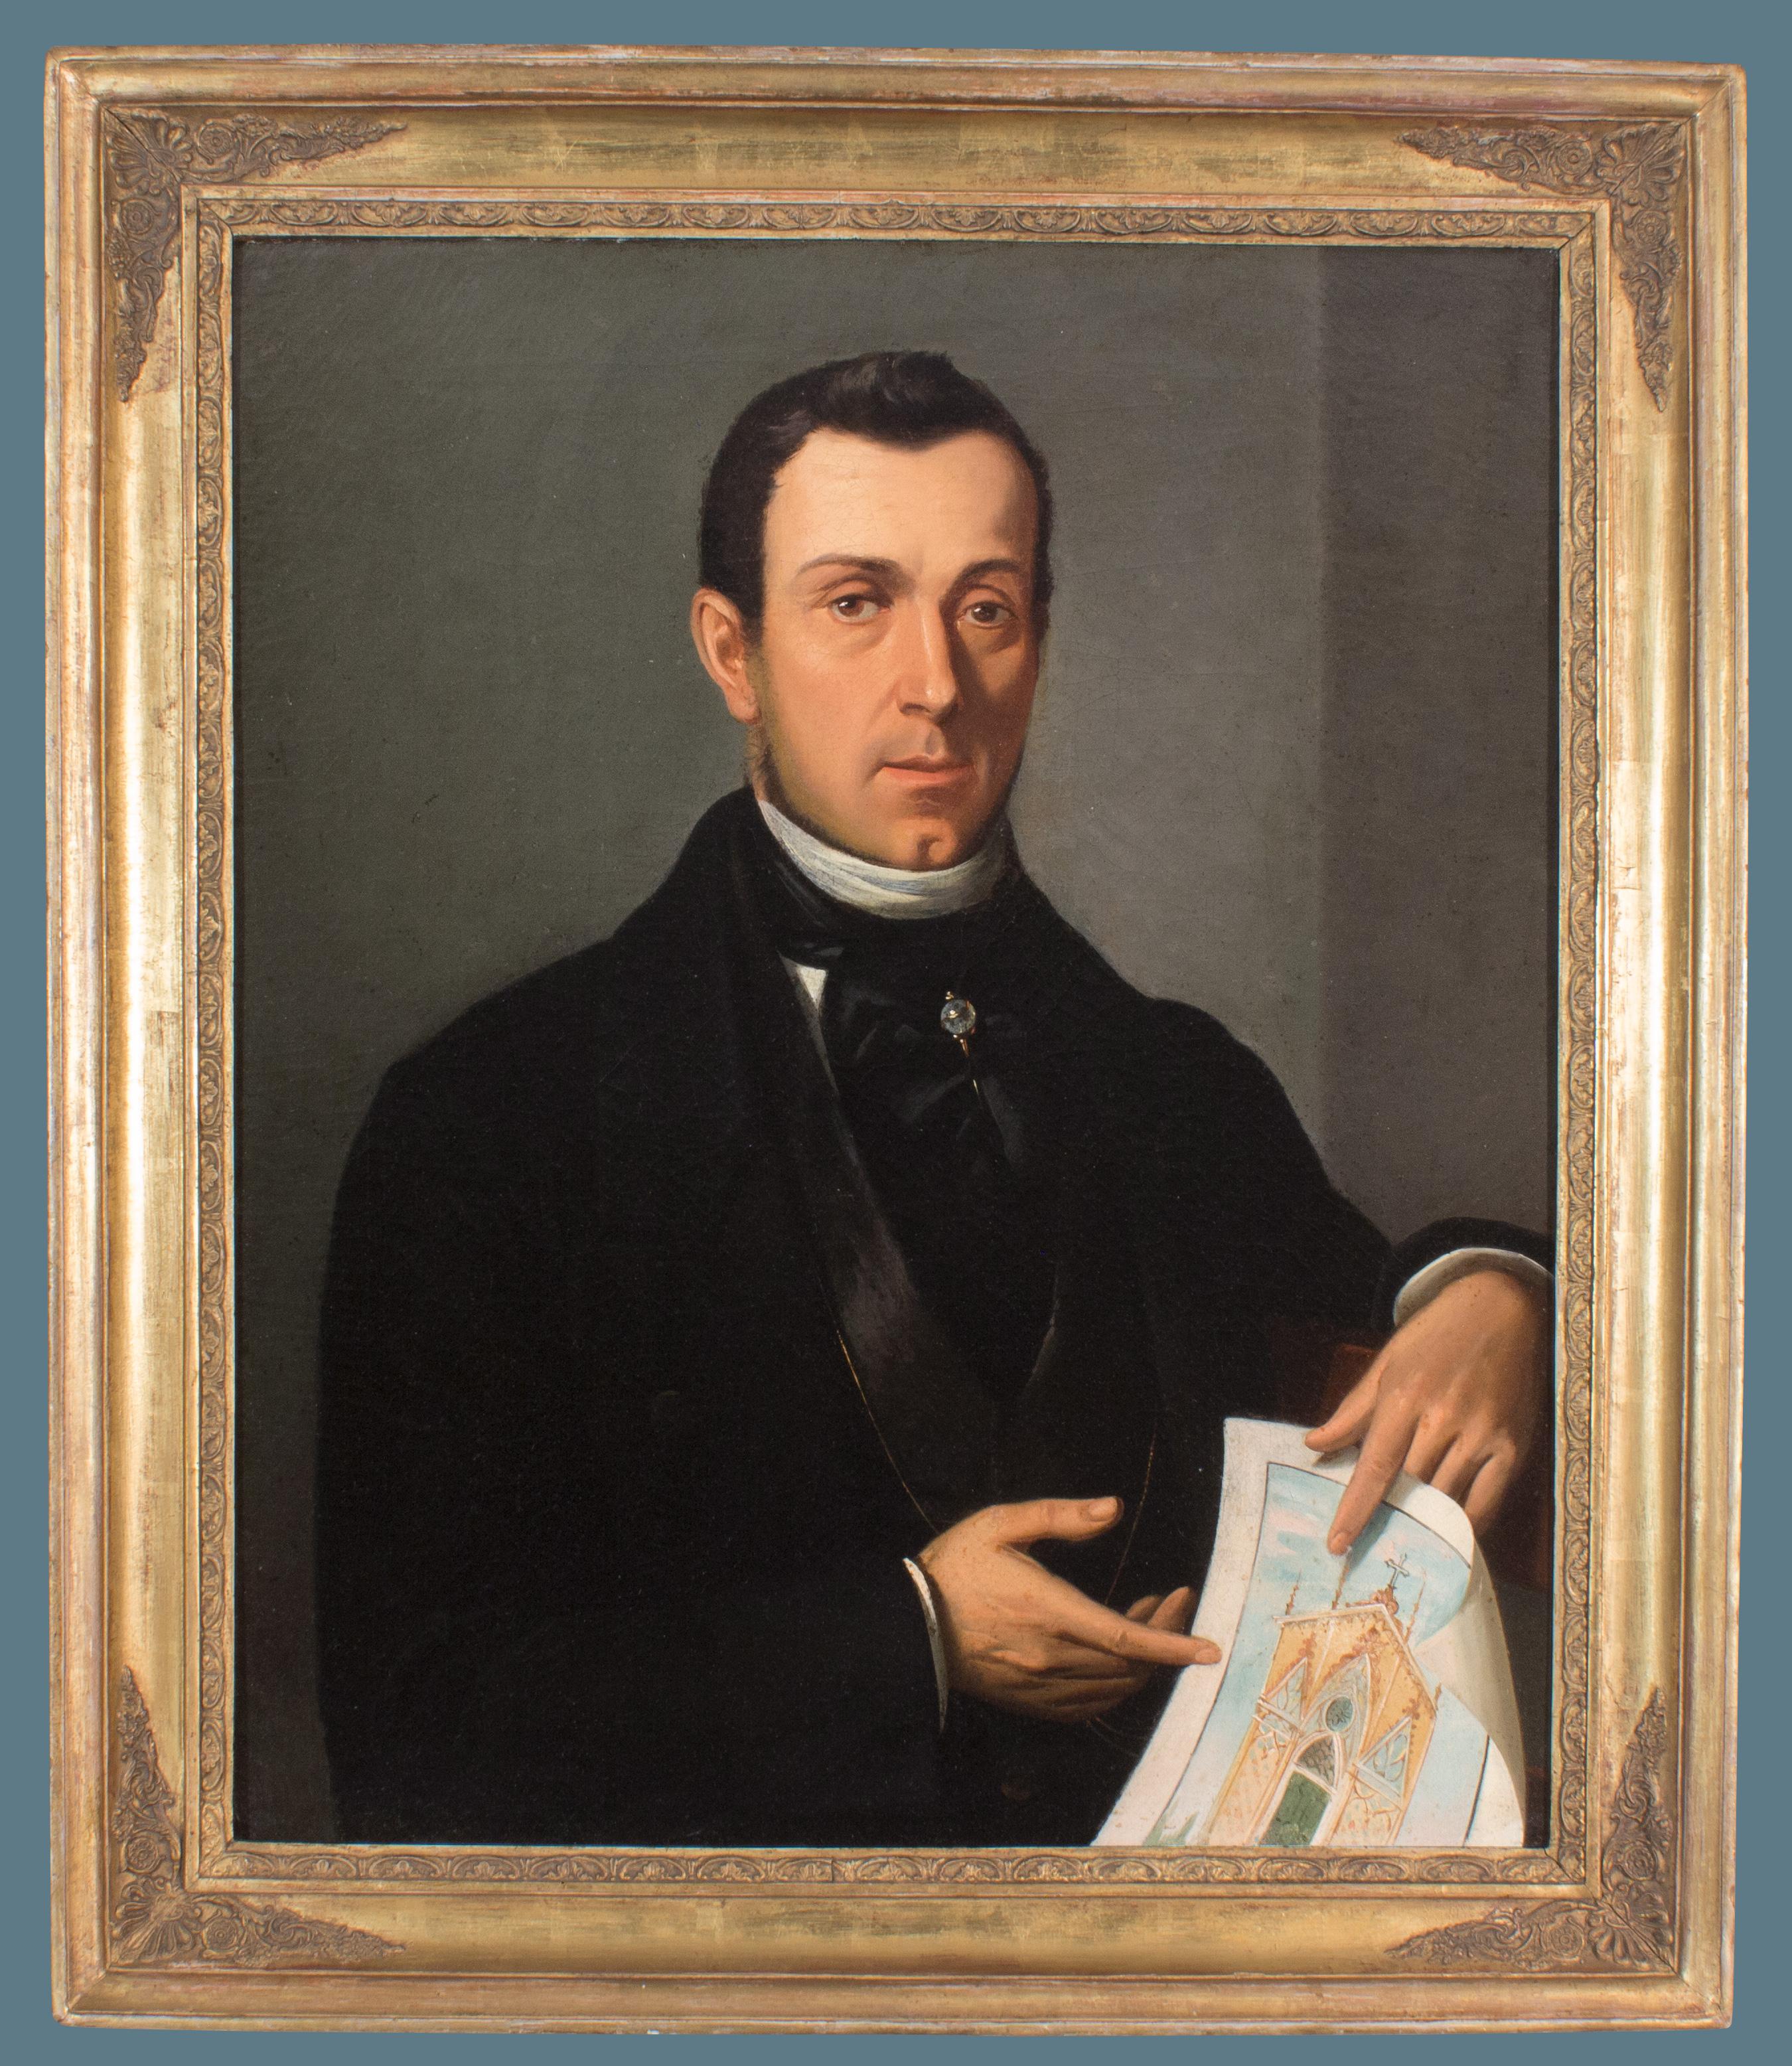 Unknown Portrait Painting - Portrait of a Man with Architectural Drawing by a European Artist